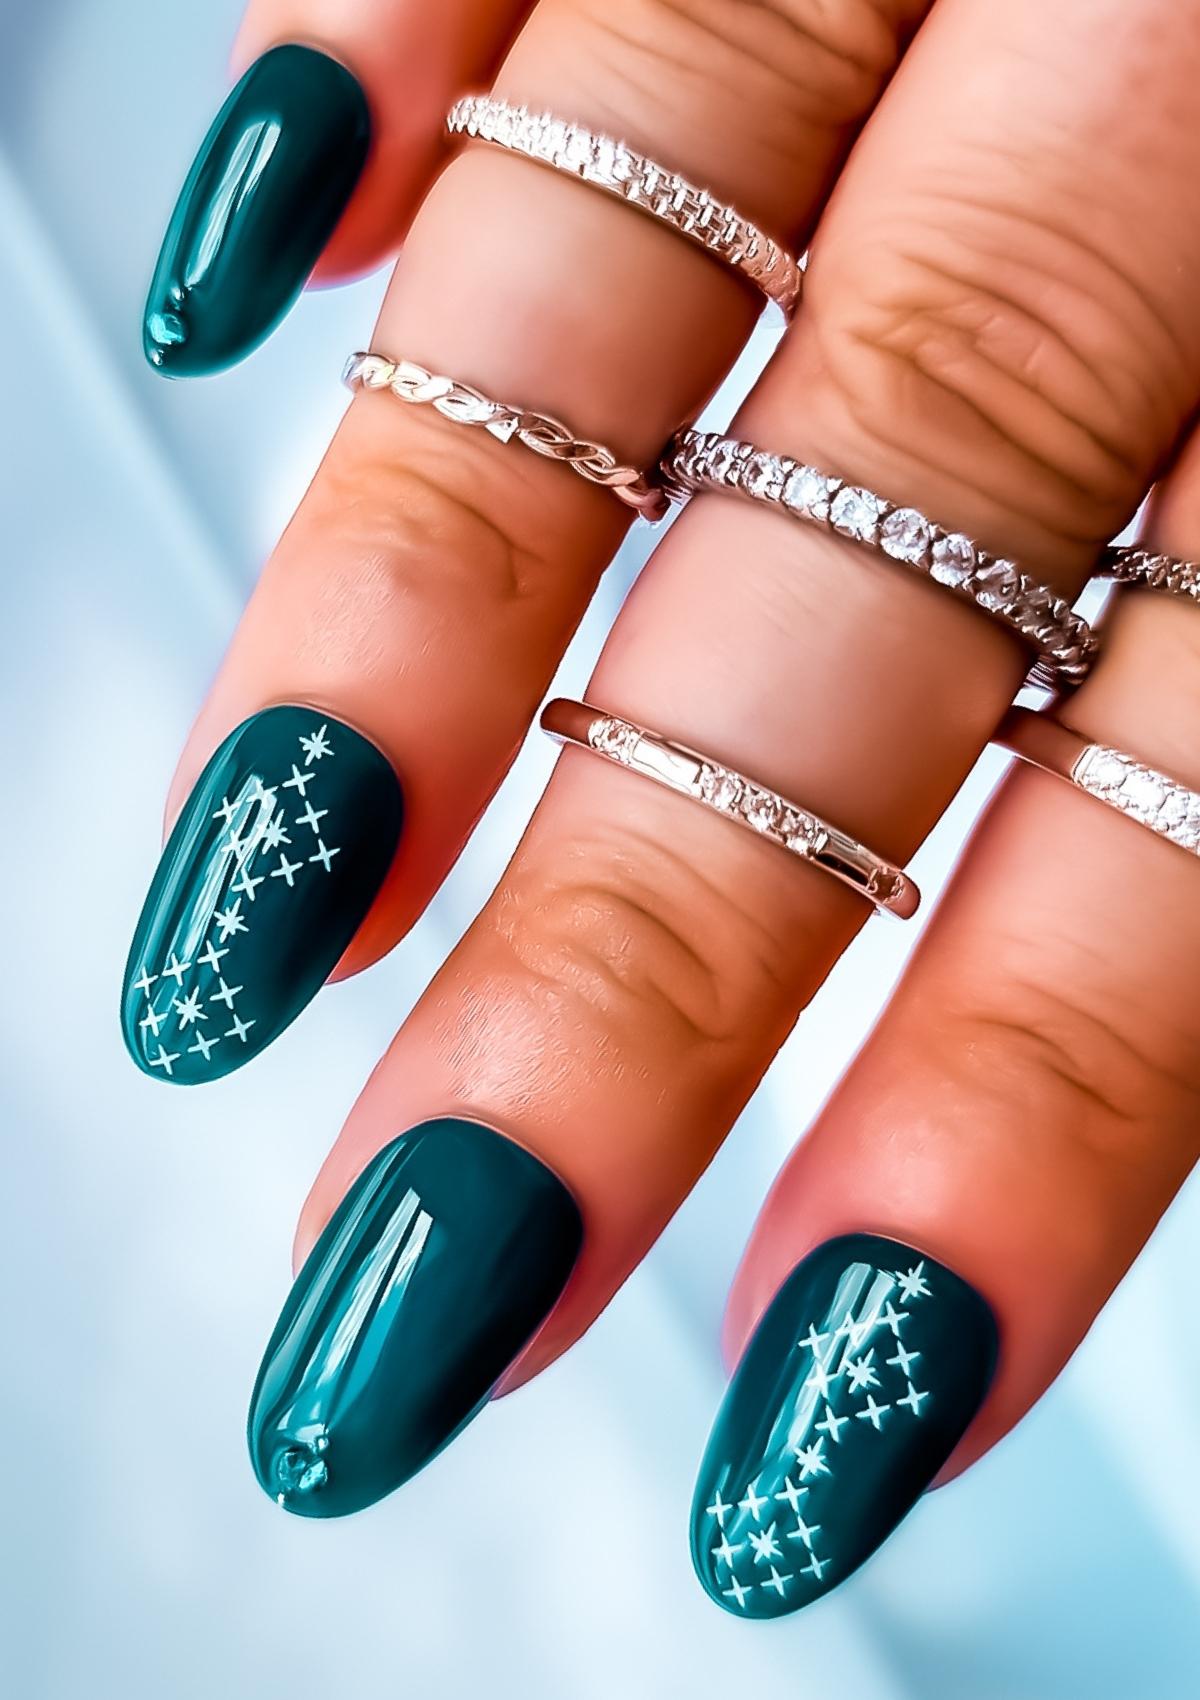 Short oval shaped nails in teal with white Maori nail art on the index and ring fingers. Nail art design in Ngā Whetu by Adrienne Whitewood.  